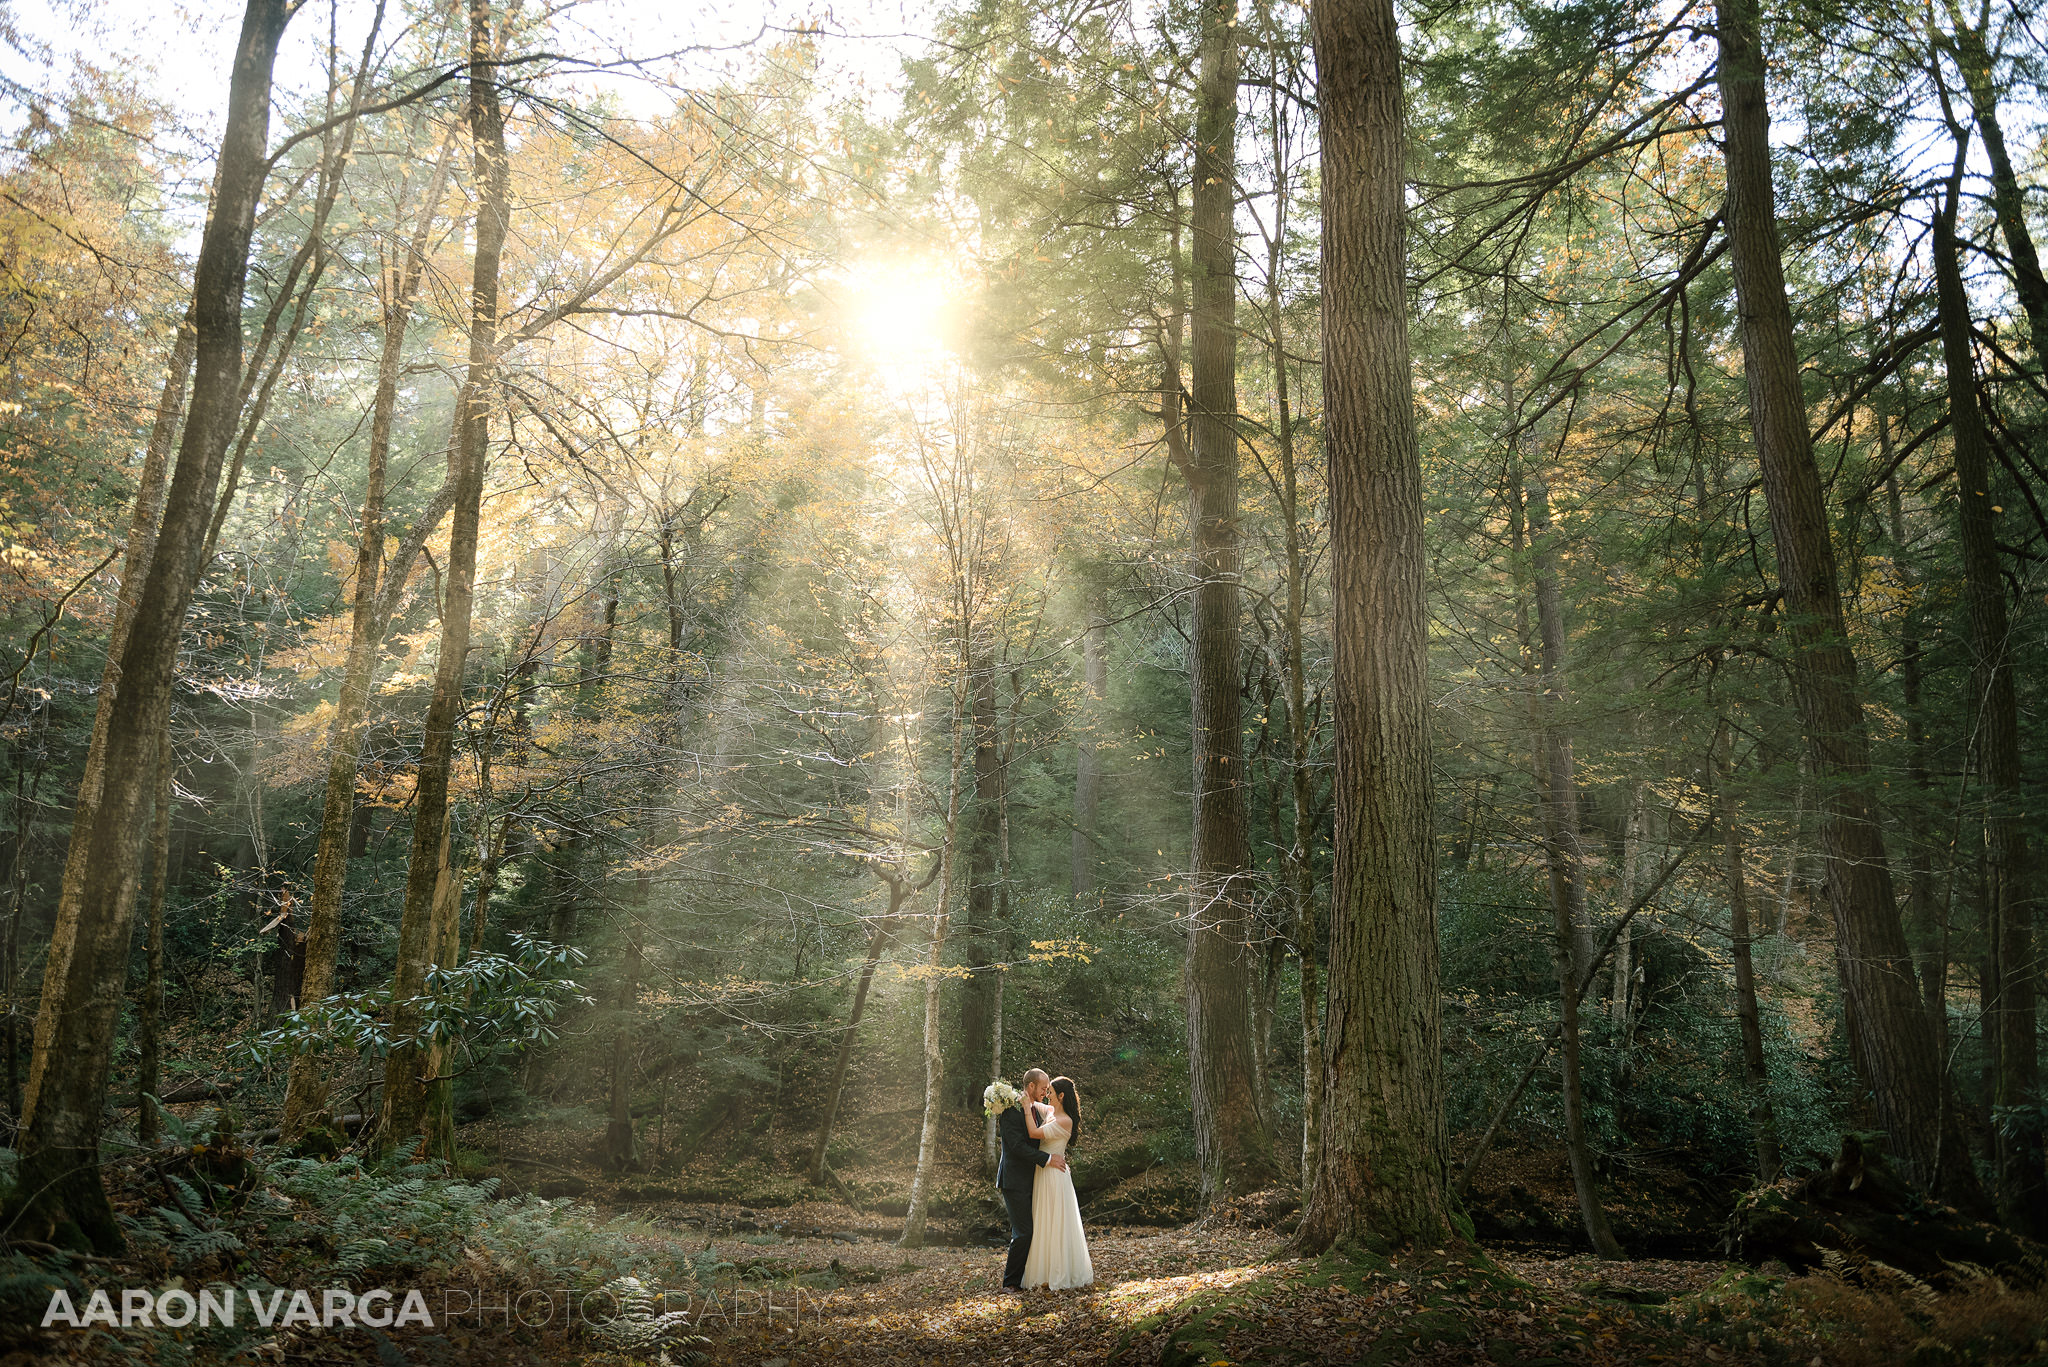 33 incredible wedding photo sun rays - Morgan + Greg | Cook Forest State Park Elopement Photos